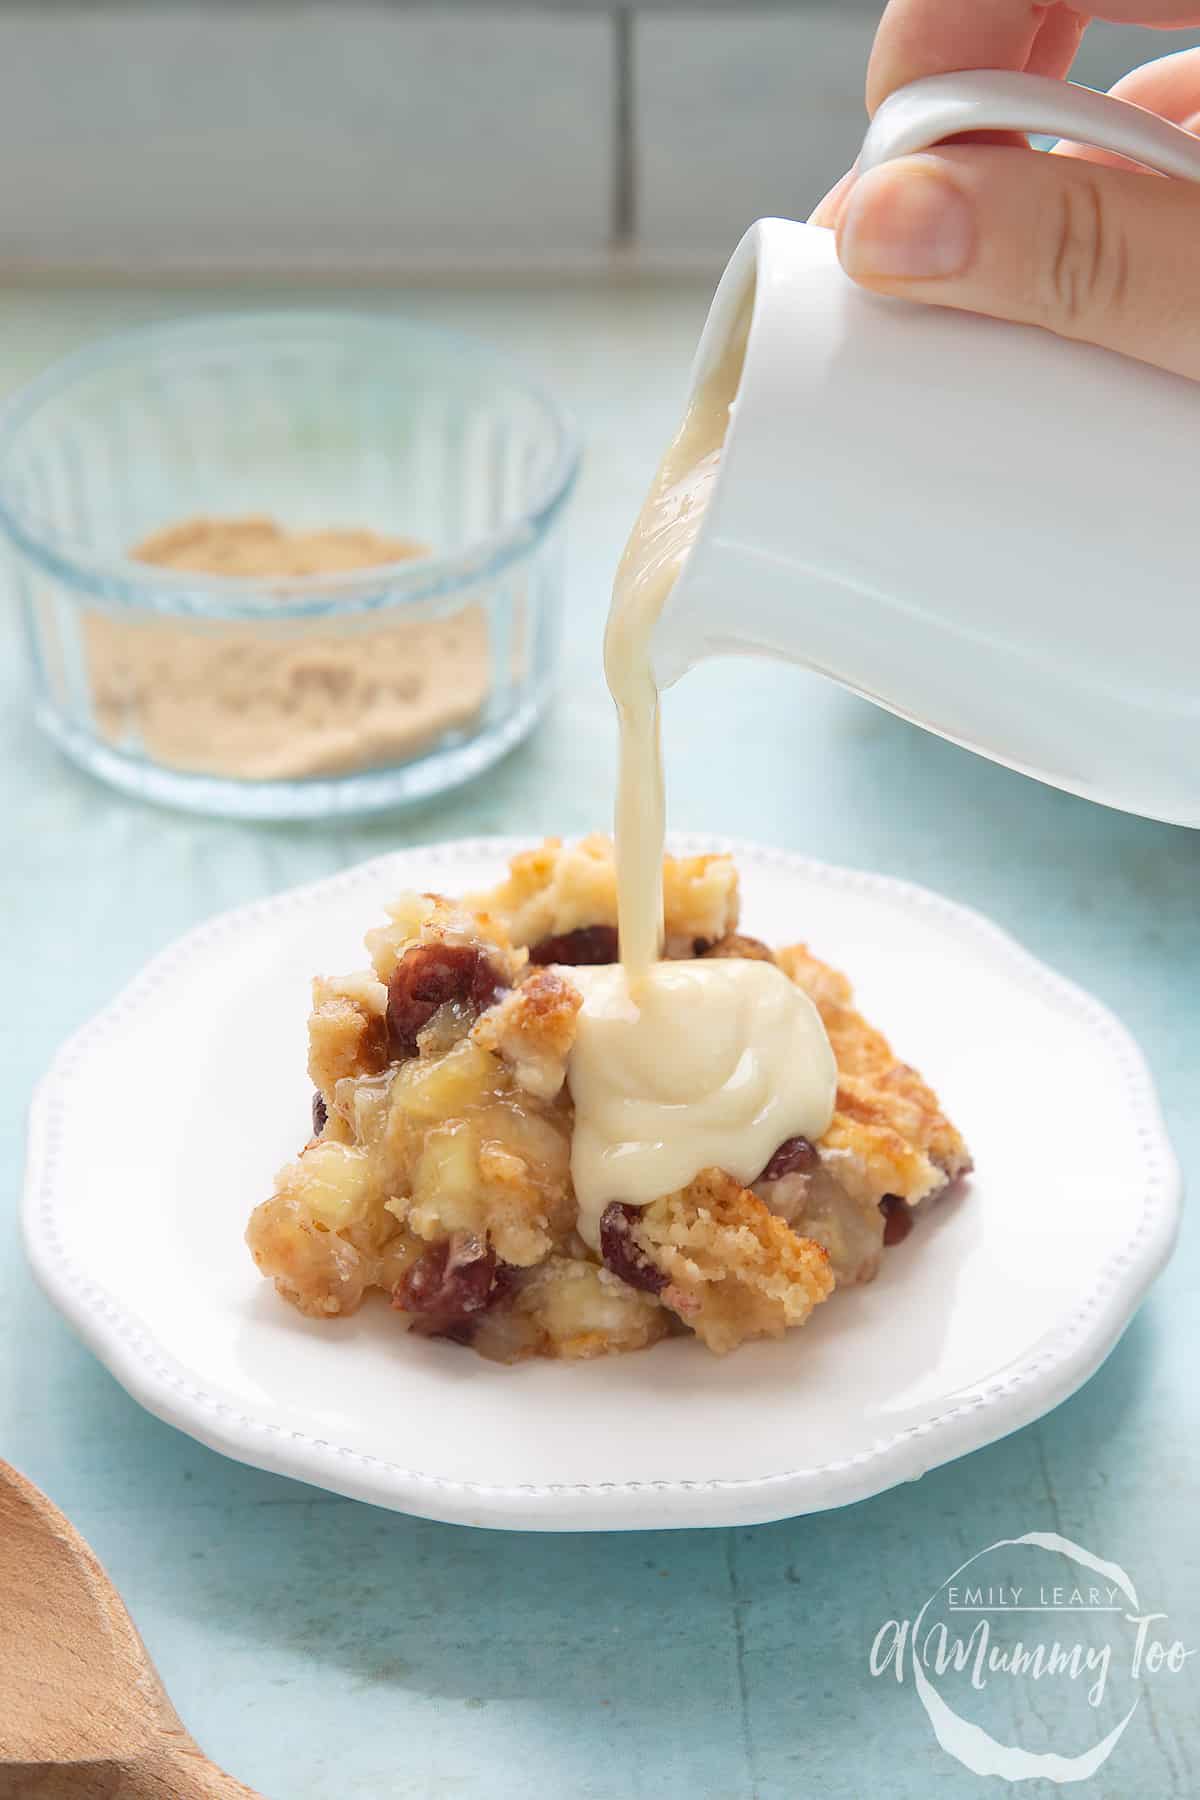 A berry crumble on a white plate. A hand holds a small white jug of vegan custard, which is being poured onto the crumble.